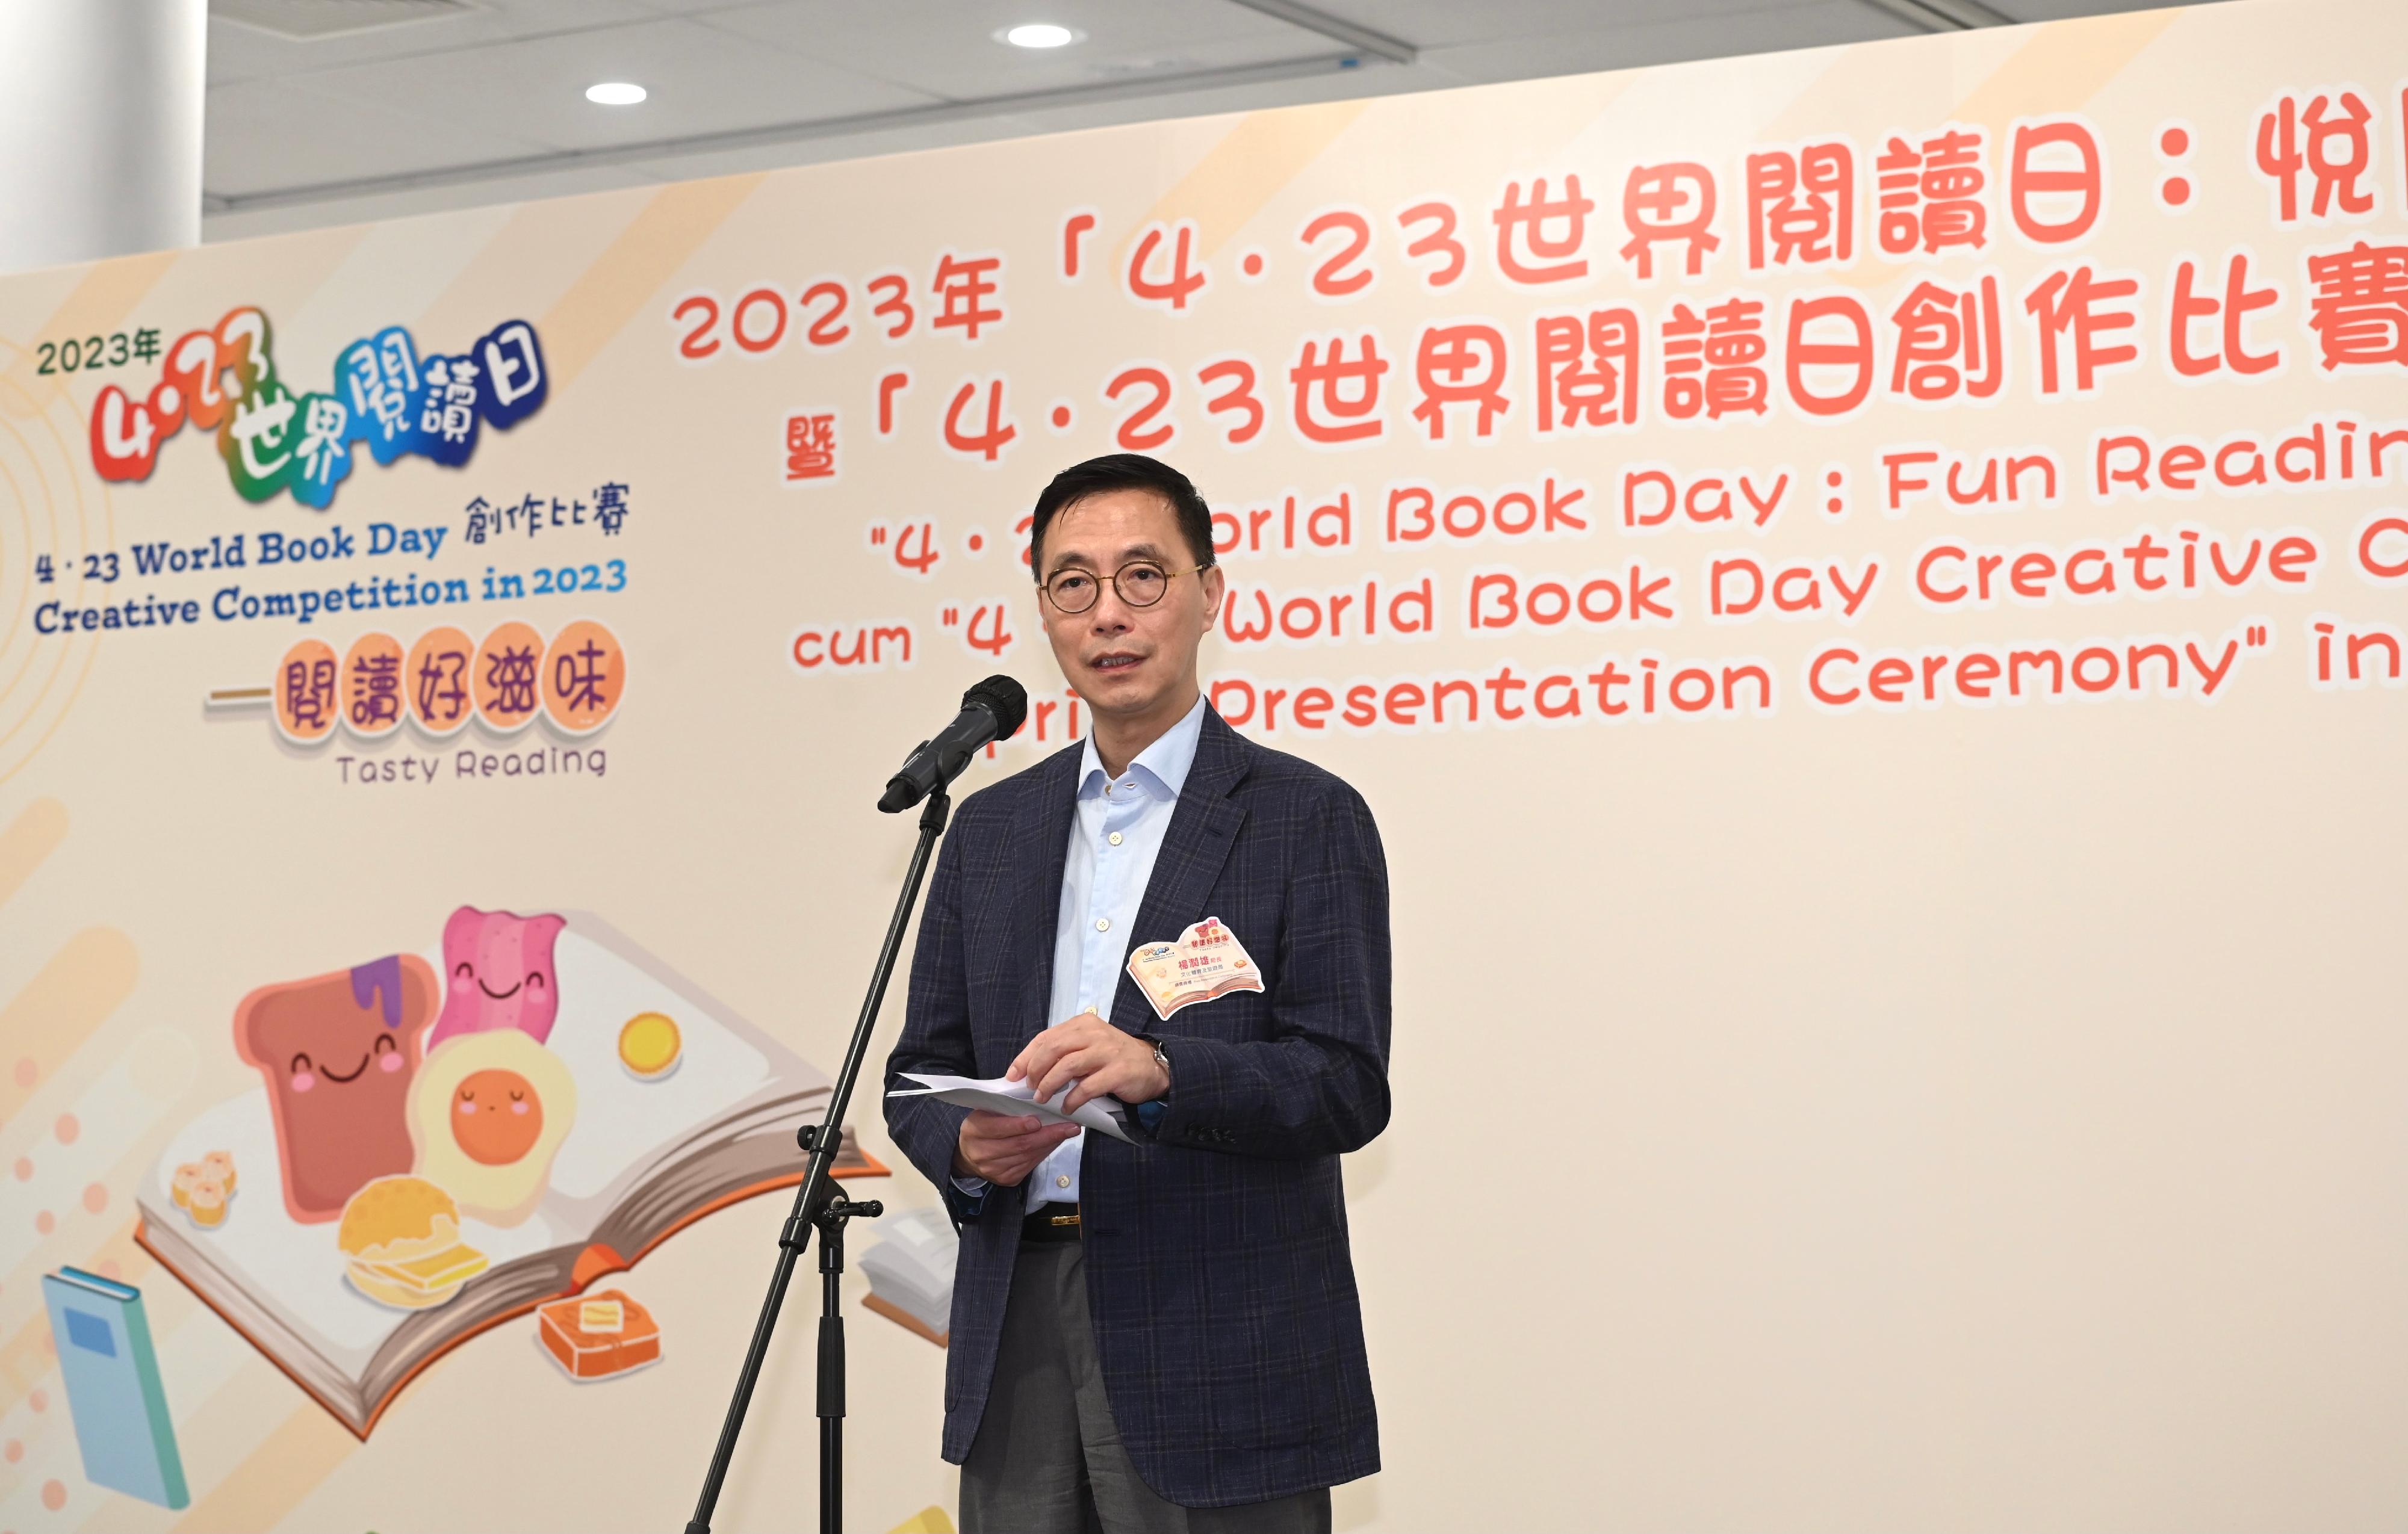 To tie in with the 4.23 World Book Day, the Hong Kong Public Libraries of the Leisure and Cultural Services Department organised the "' 4.23 World Book Day: Fun Reading for All' cum ' 4.23 World Book Day Creative Competition Prize Presentation Ceremony' in 2023" at the Hong Kong Central Library today (April 23). Photo shows the Secretary for Culture, Sports and Tourism, Mr Kevin Yeung, speaking at the prize presentation ceremony. 